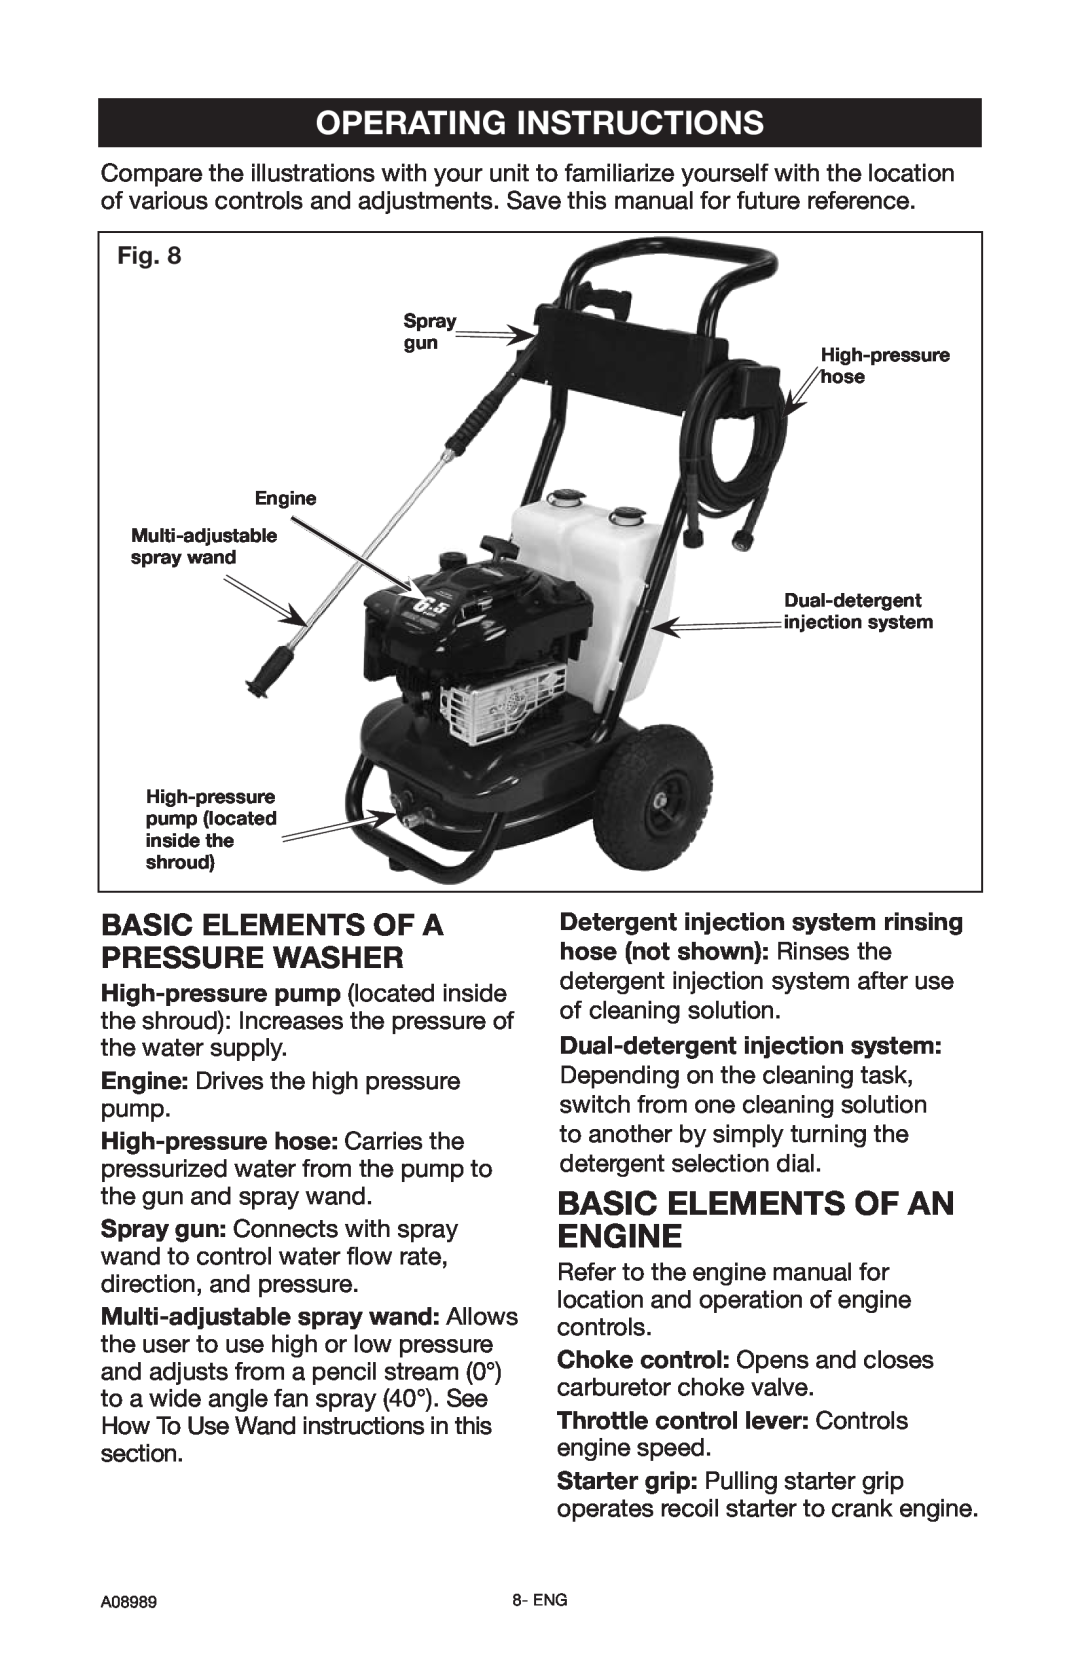 DeVillbiss Air Power Company S2600, A08989 Operating Instructions, Basic Elements Of A Pressure Washer 